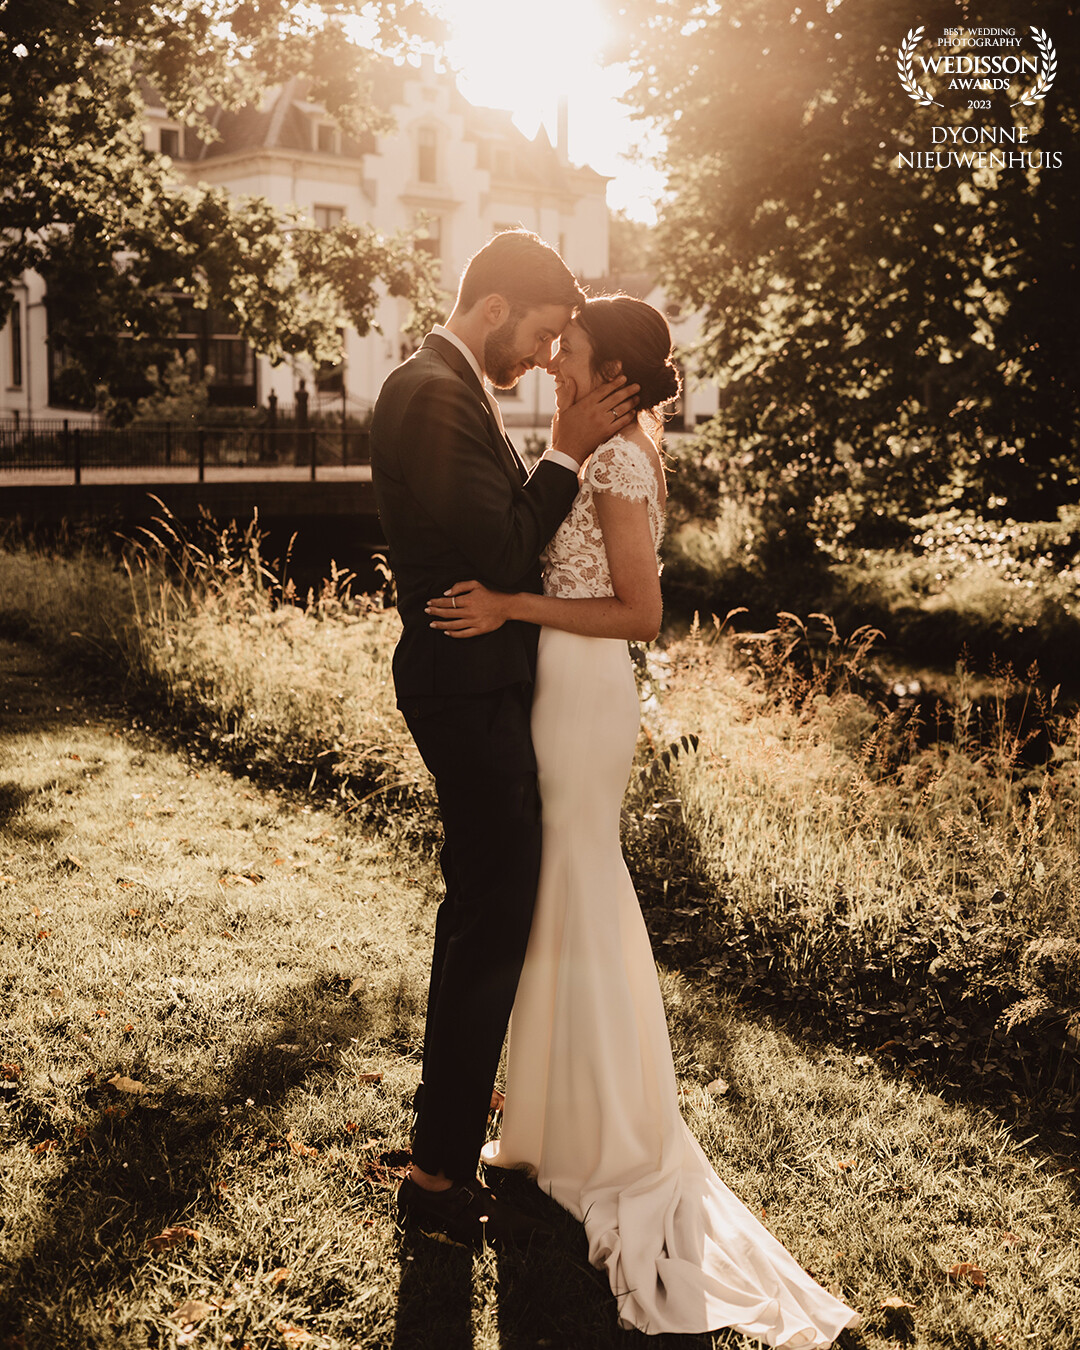 A wonderful sunset shoot, a moment of the two of them at Staverden Estate